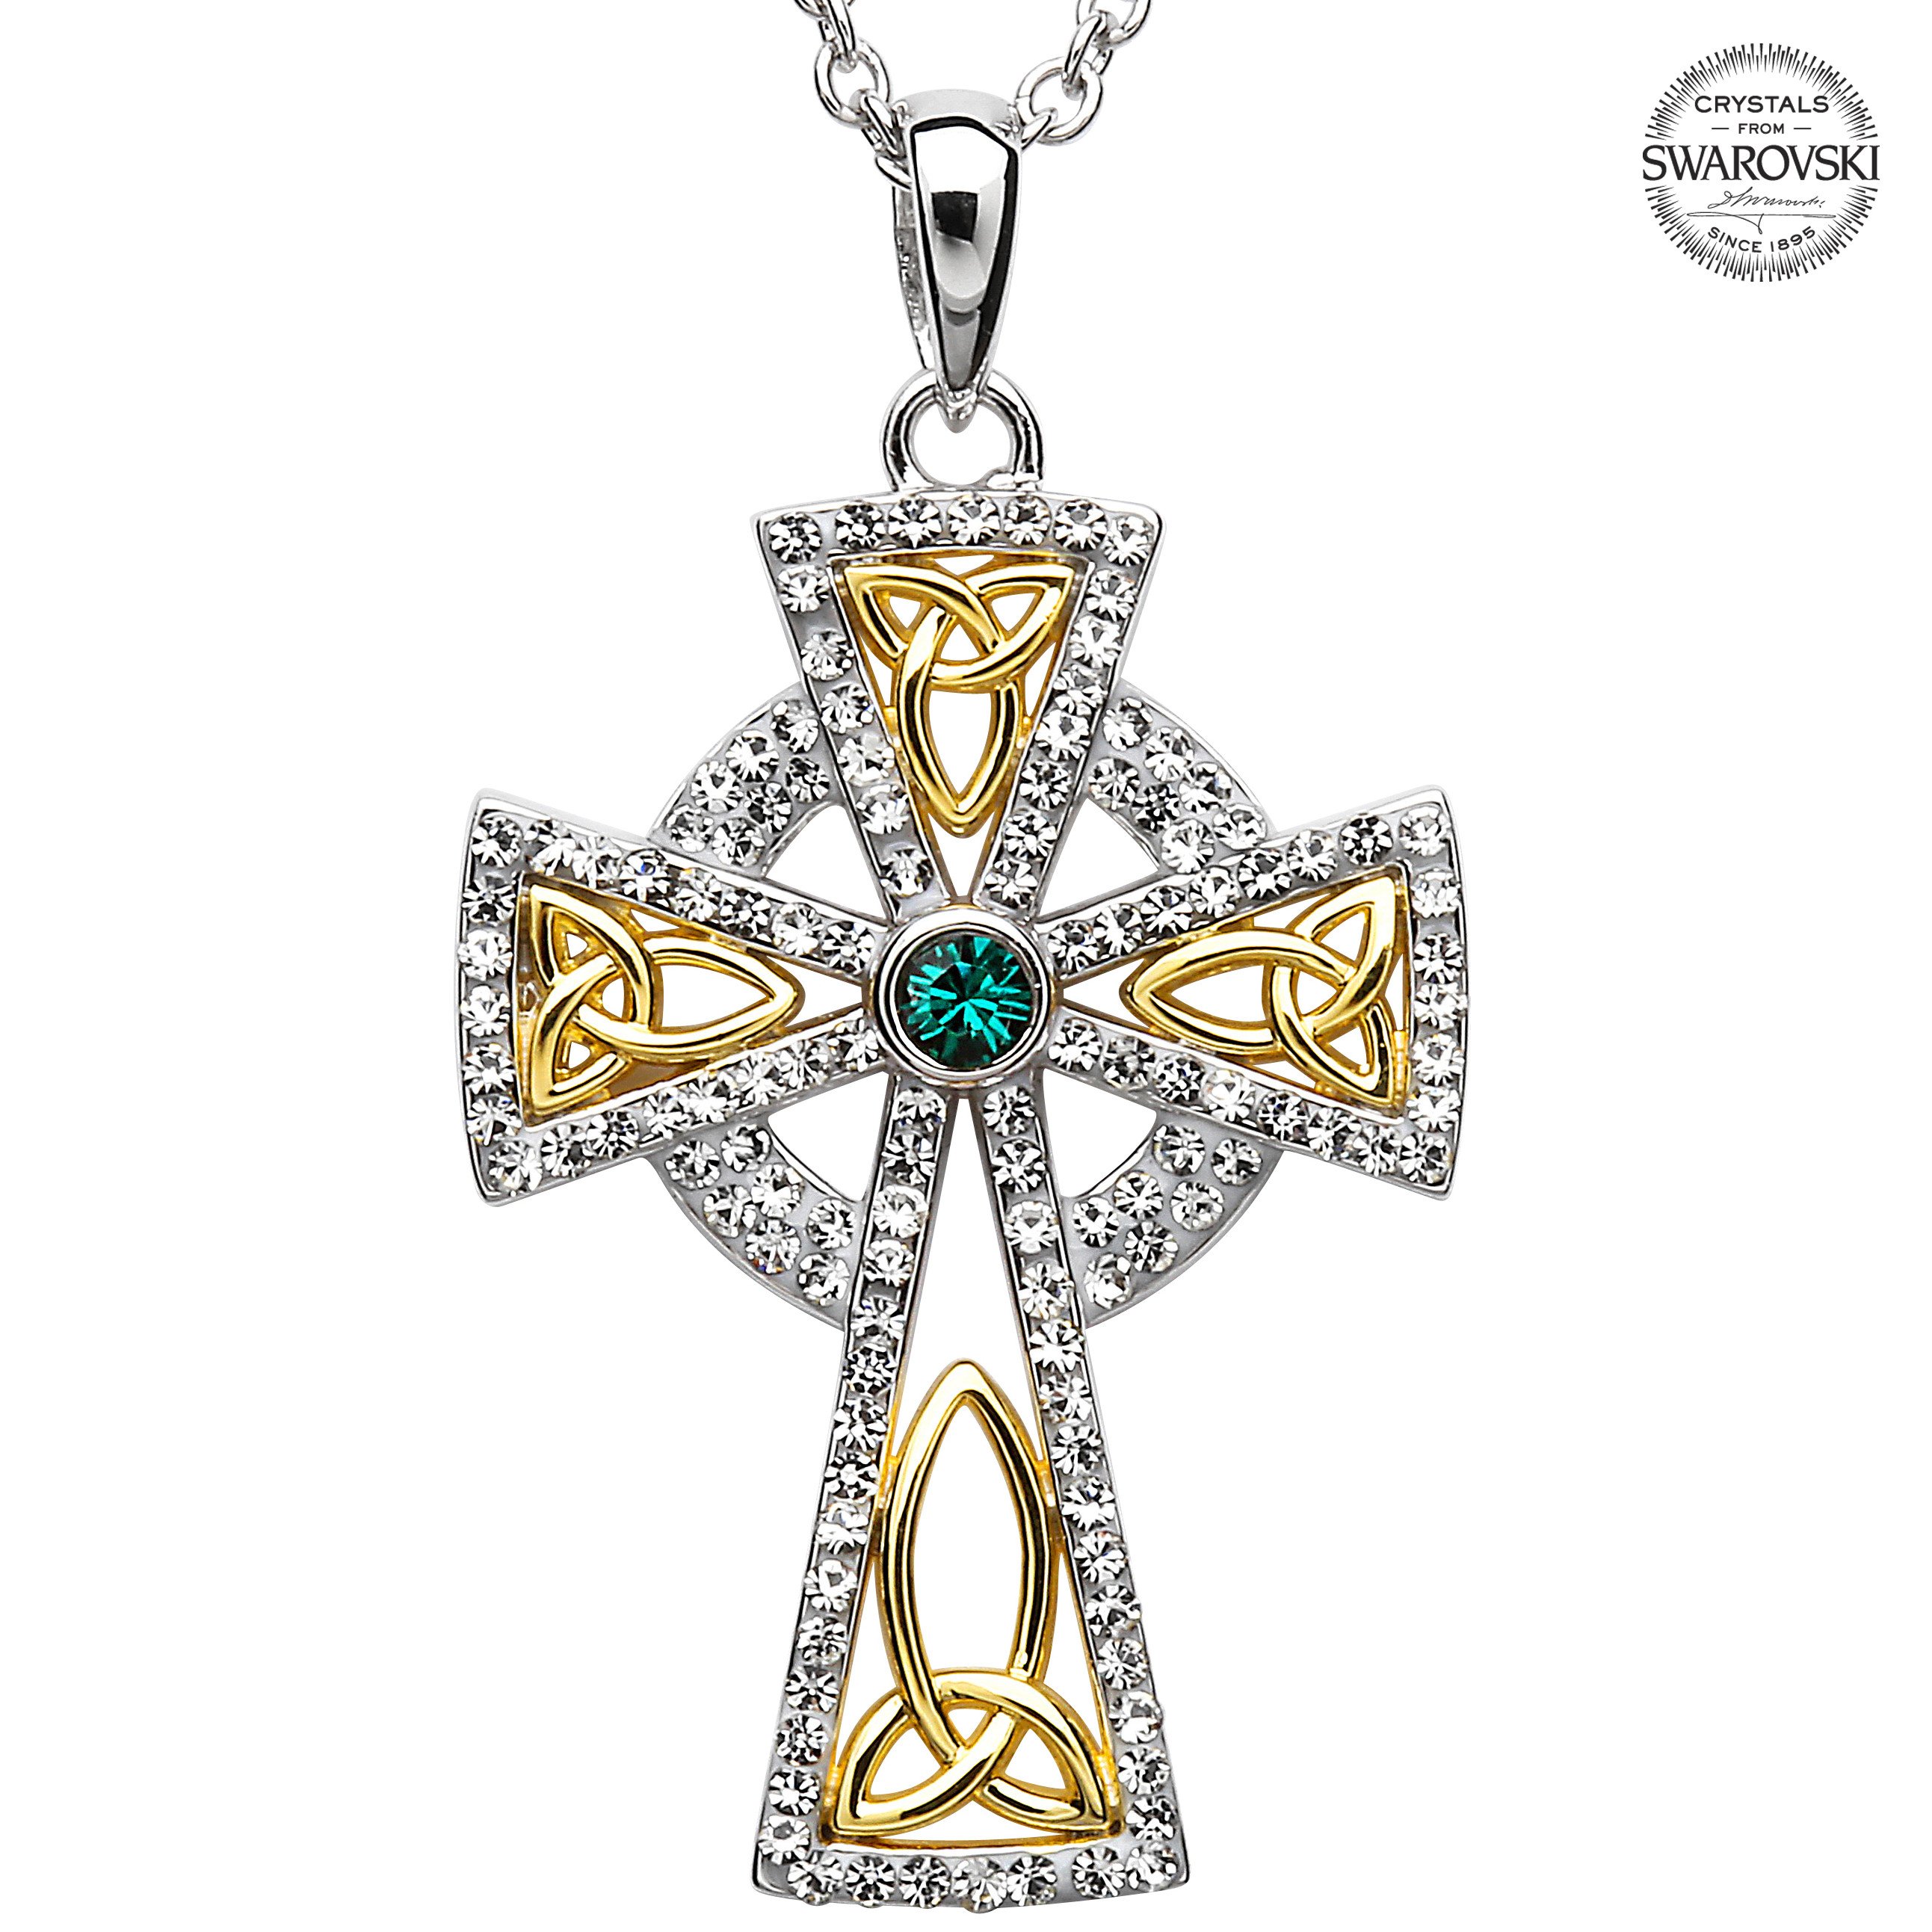 Men's Nail Crucifix Necklace - 14KT Gold Over Sterling Silver Pendant On  24